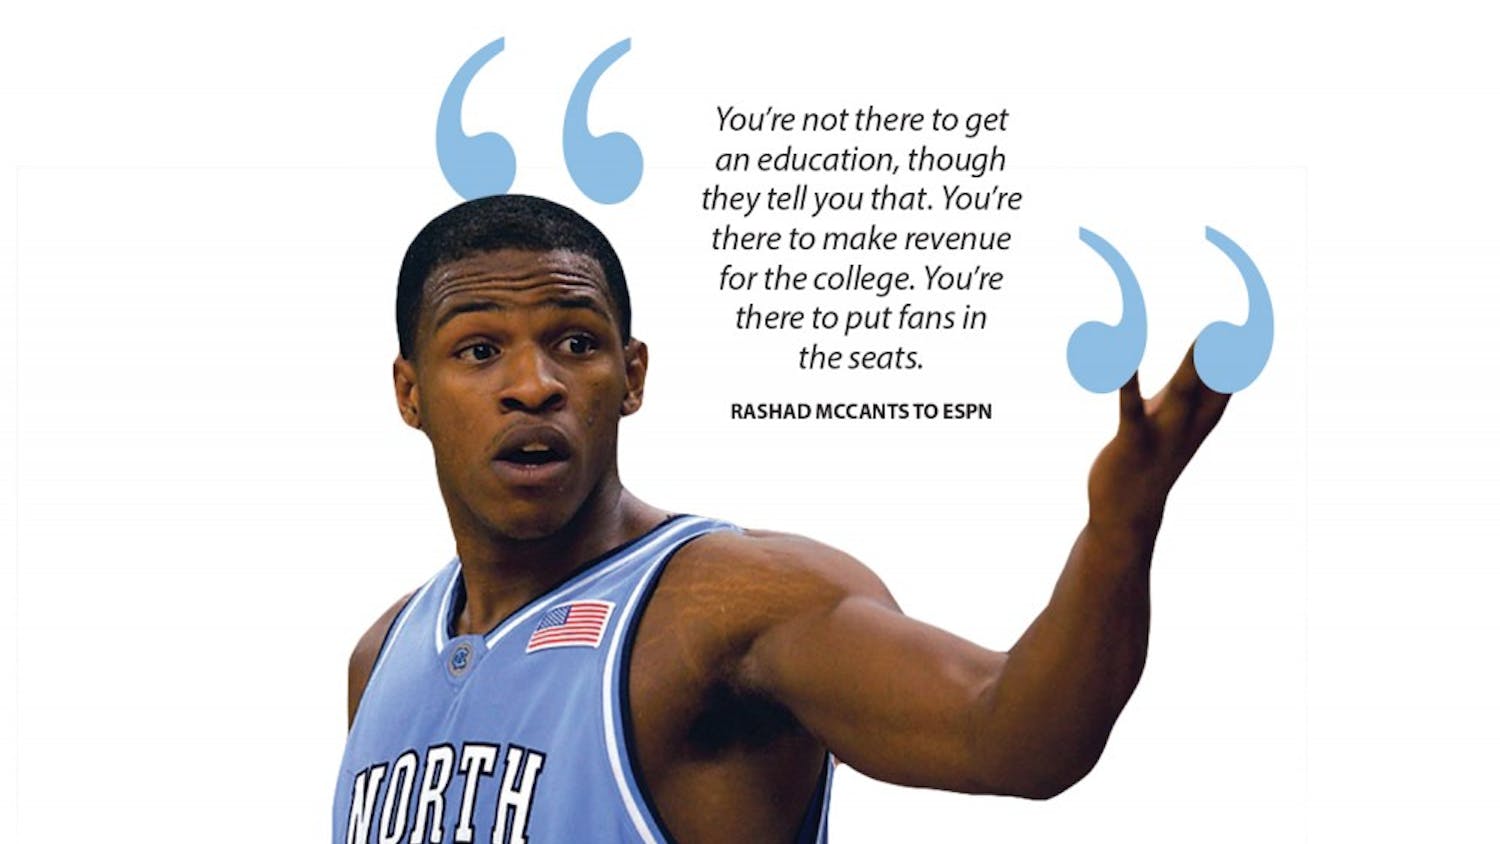 Last Friday, Rashad McCants — former UNC basketball player and a member of the 2005 national championship team — gave an interview with ESPN's "Outside the Lines" and discussed his academic experience at UNC.